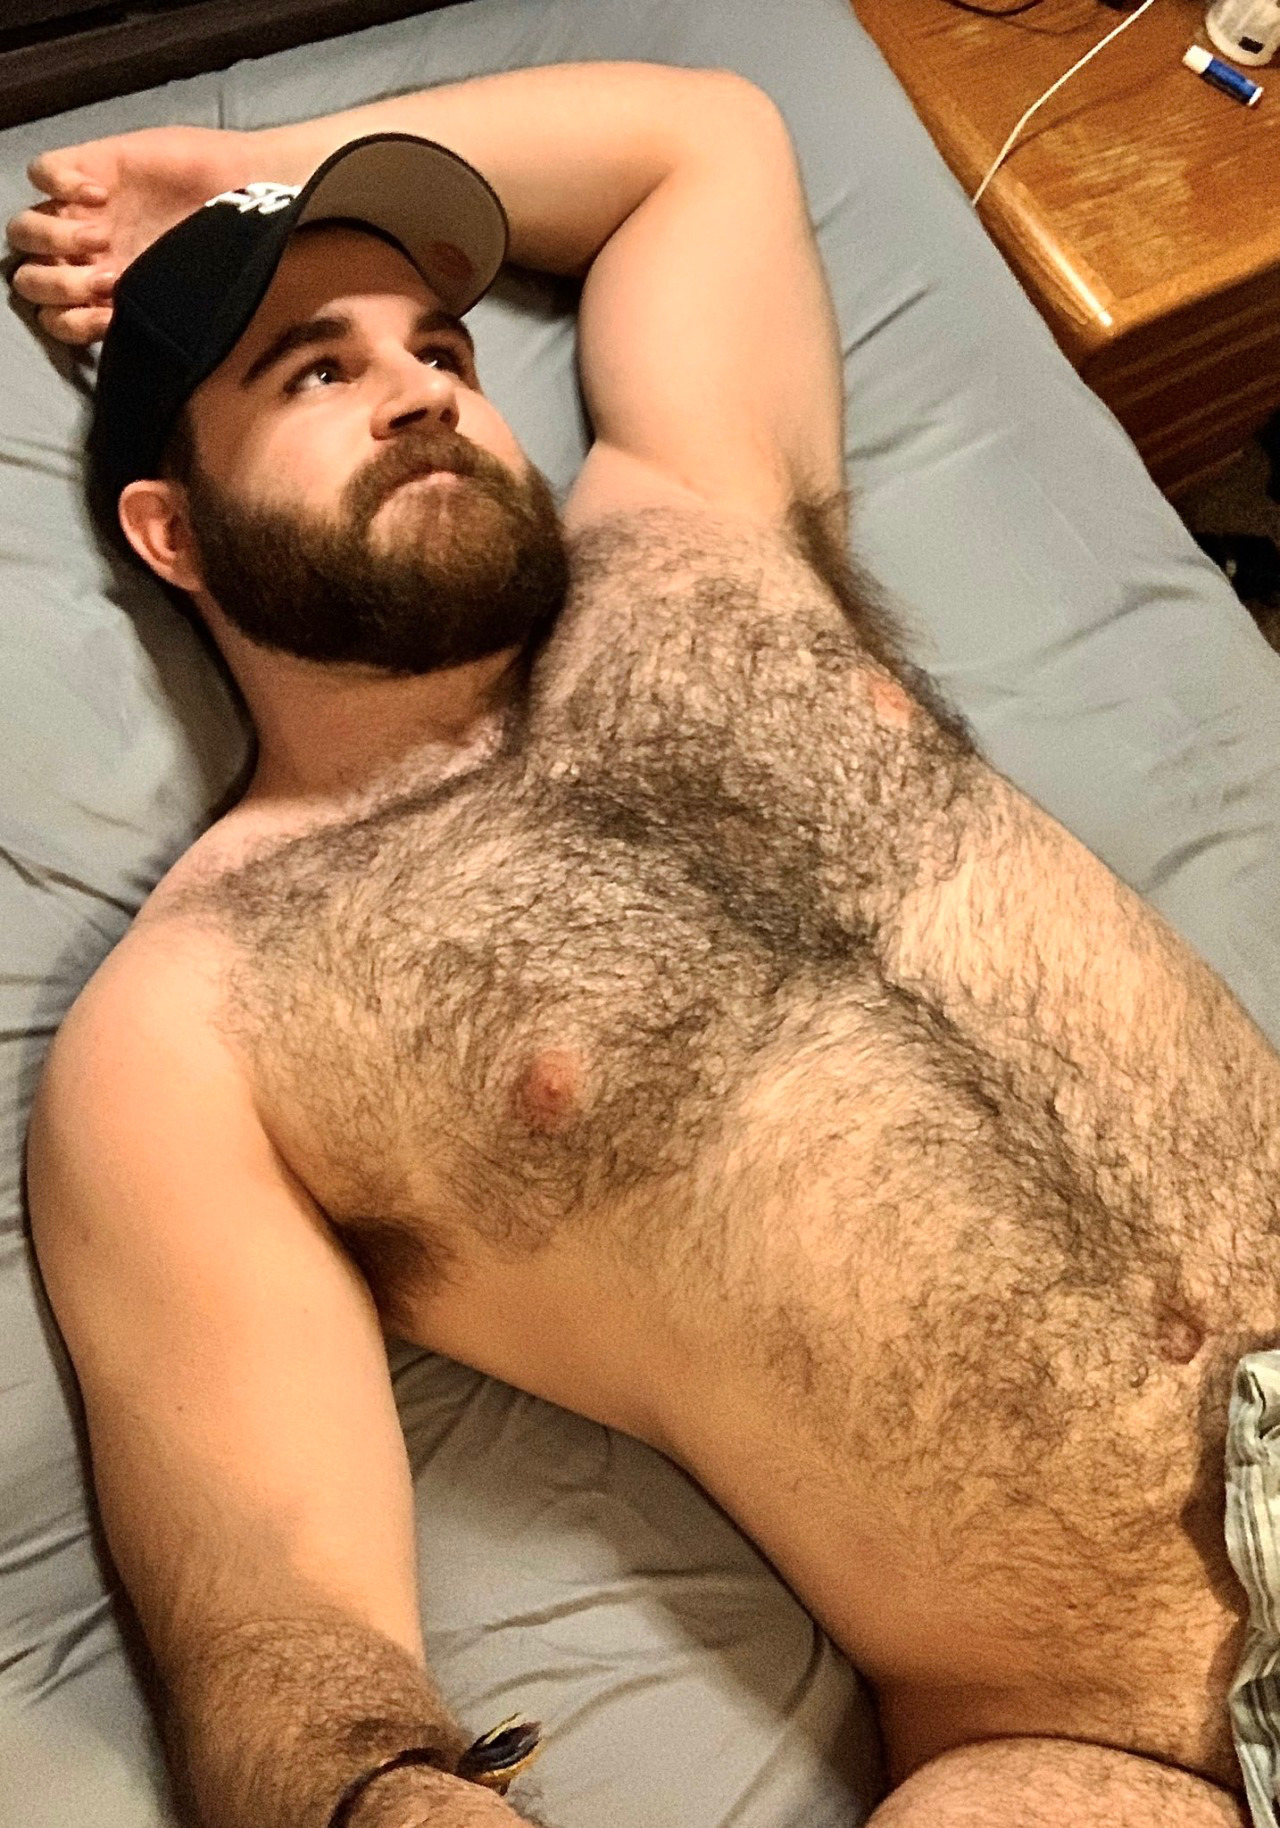 Photo by Smitty with the username @Resol702,  May 5, 2020 at 2:38 AM. The post is about the topic Gay Hairy Men